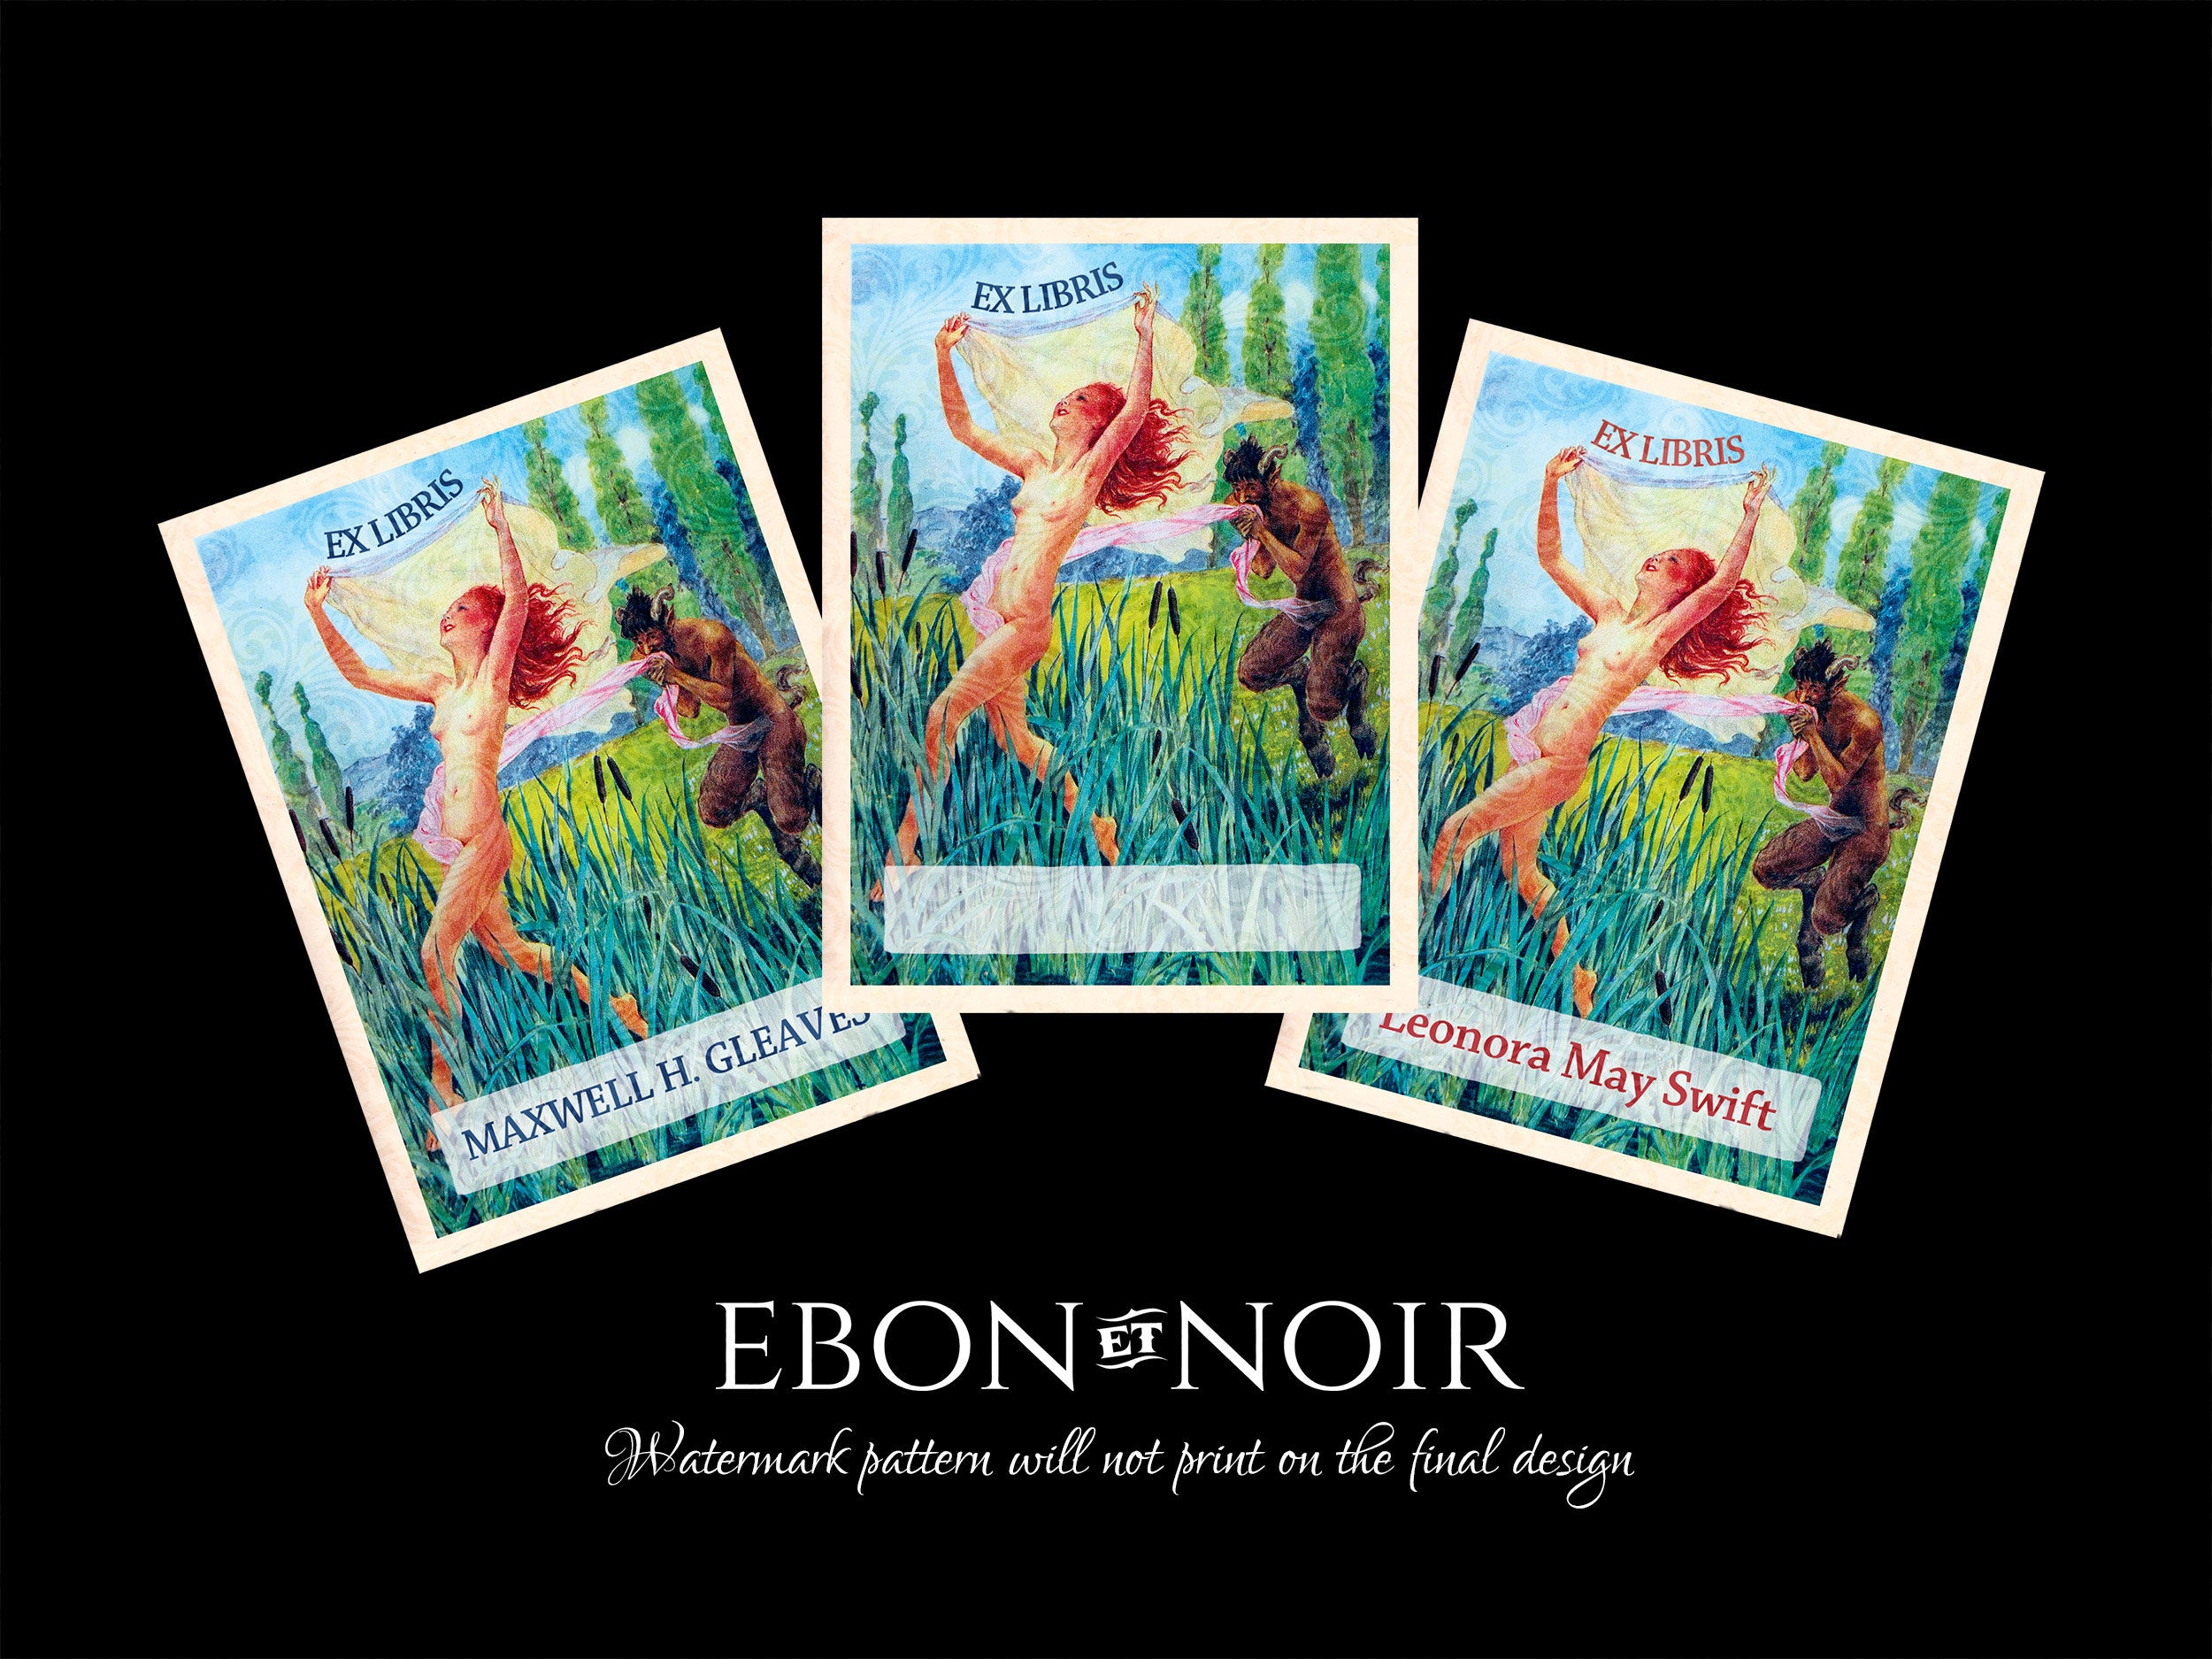 Satyr Chasing Nymph, Personalized Erotic Ex-Libris Bookplates, Crafted on Traditional Gummed Paper, 3in x 4in, Set of 30